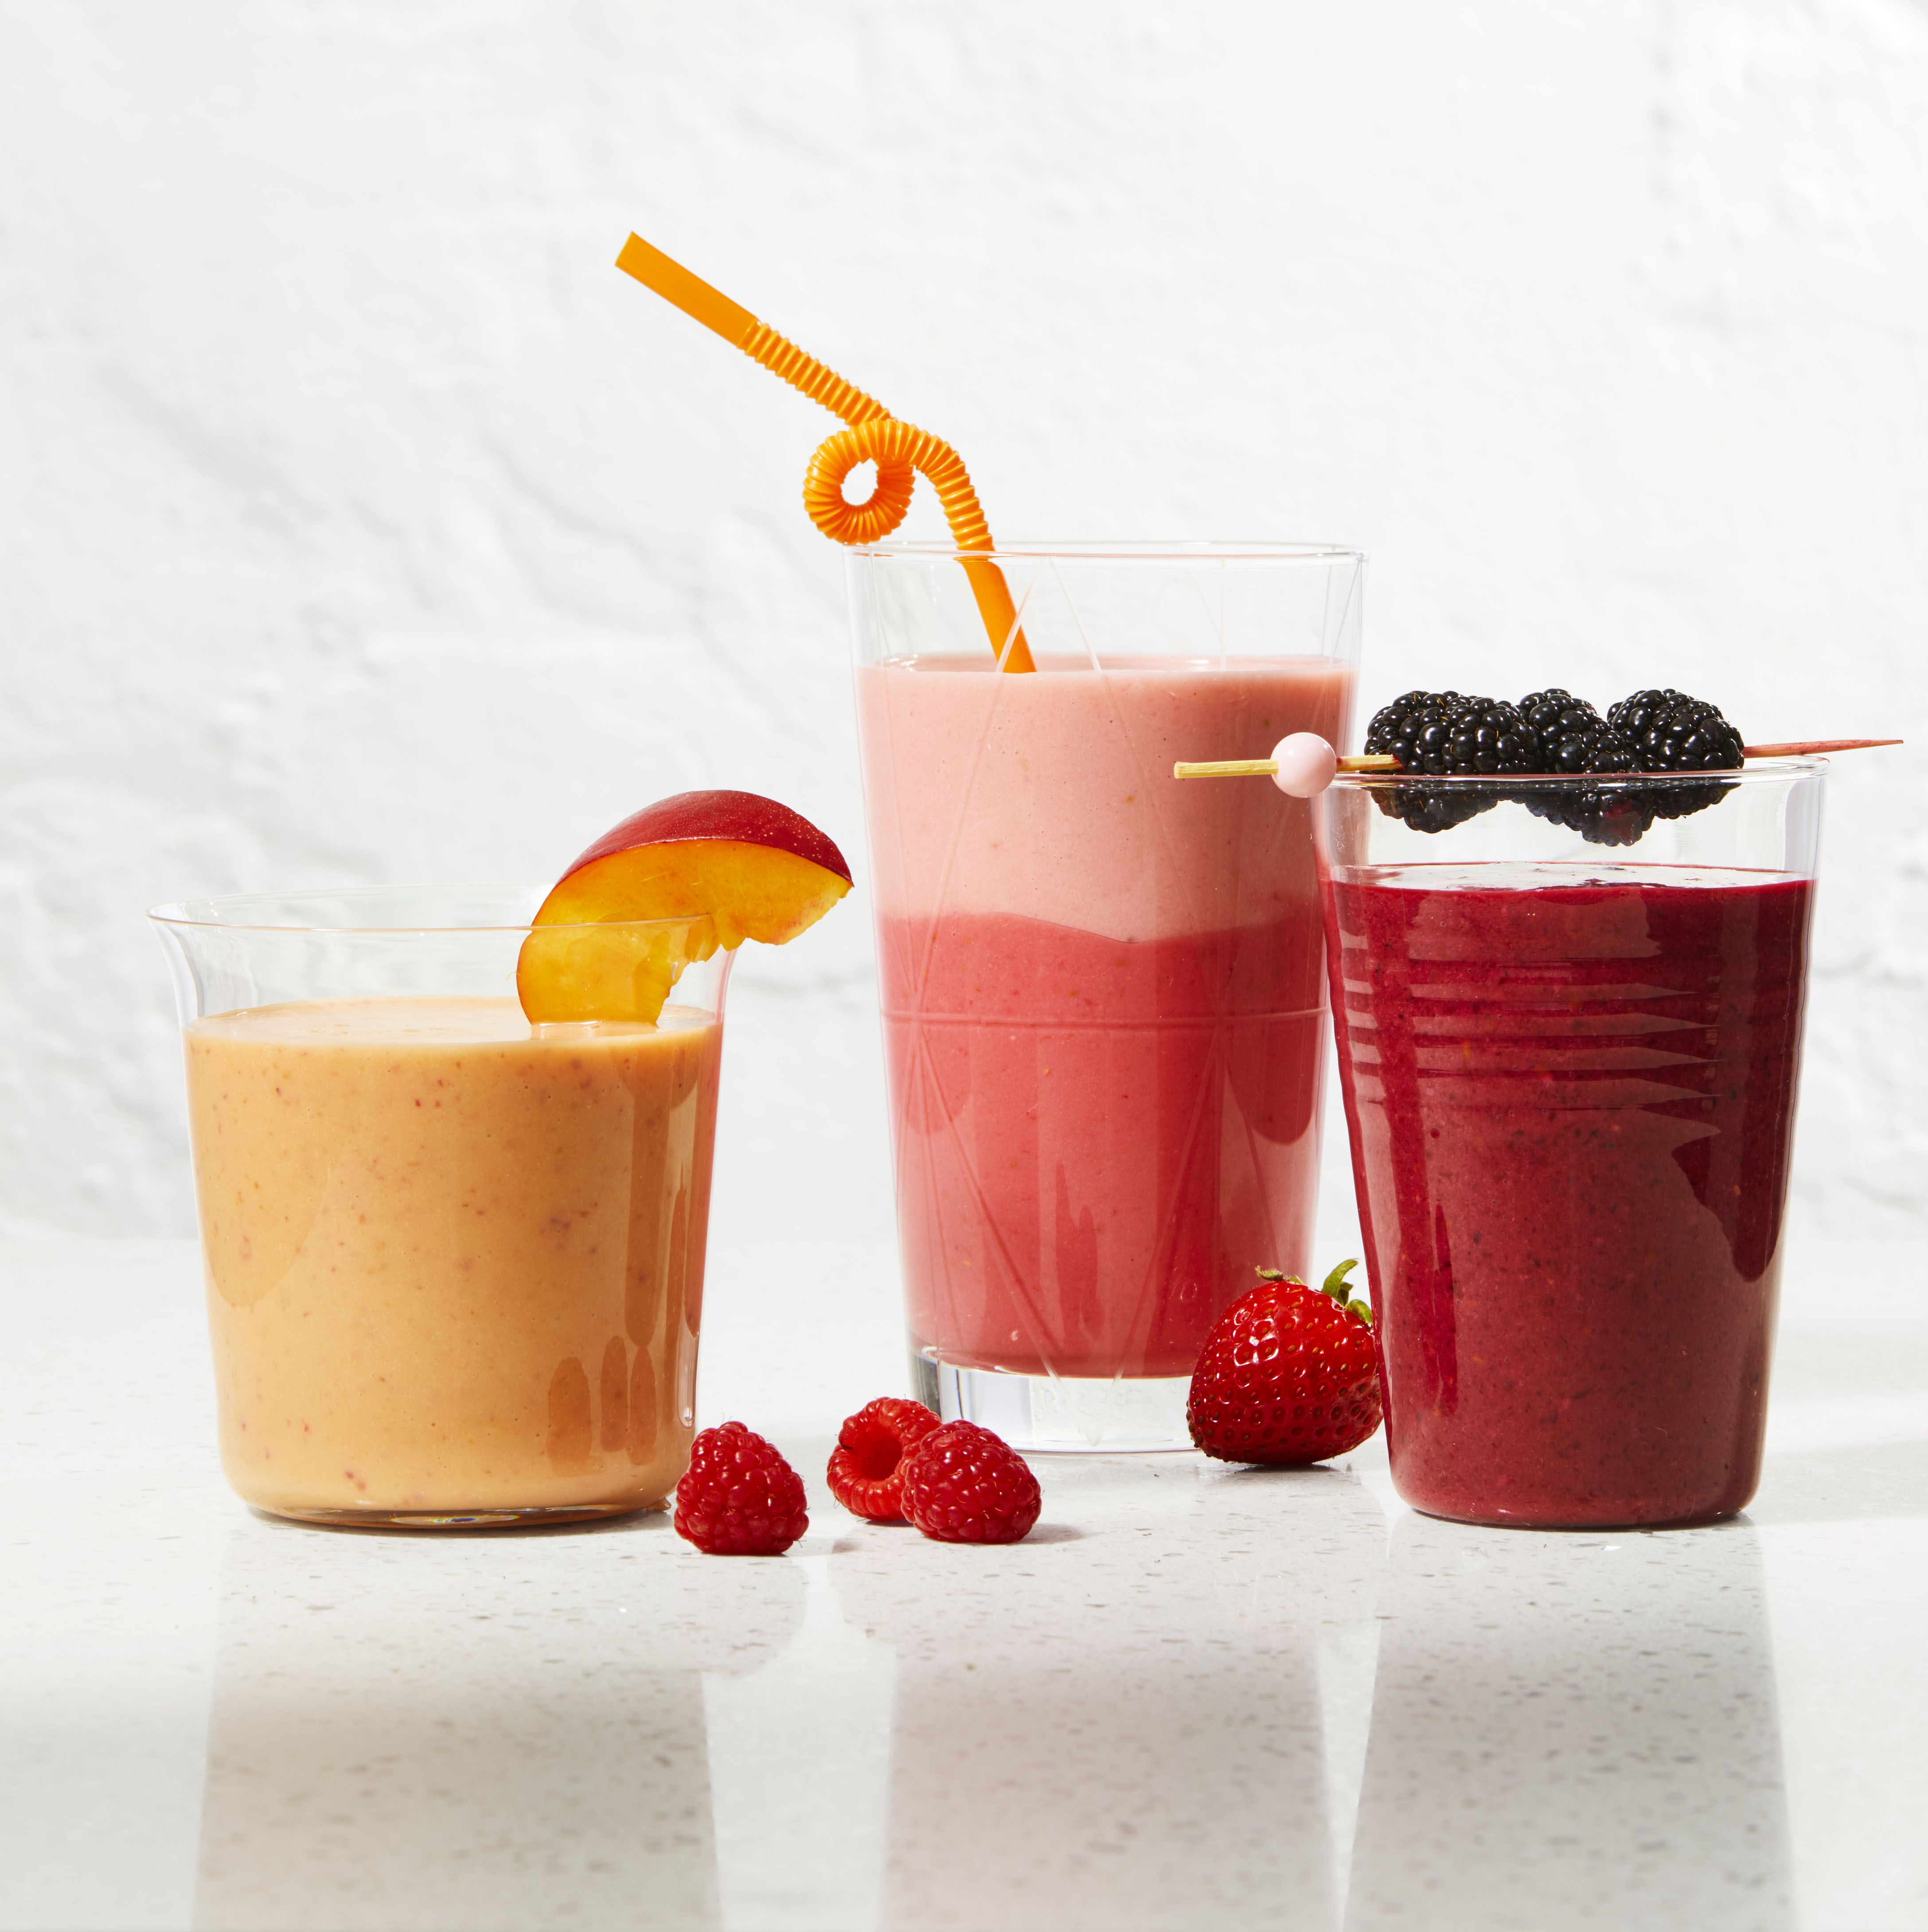 How To Make a Smoothie Like an Absolute Mix Master